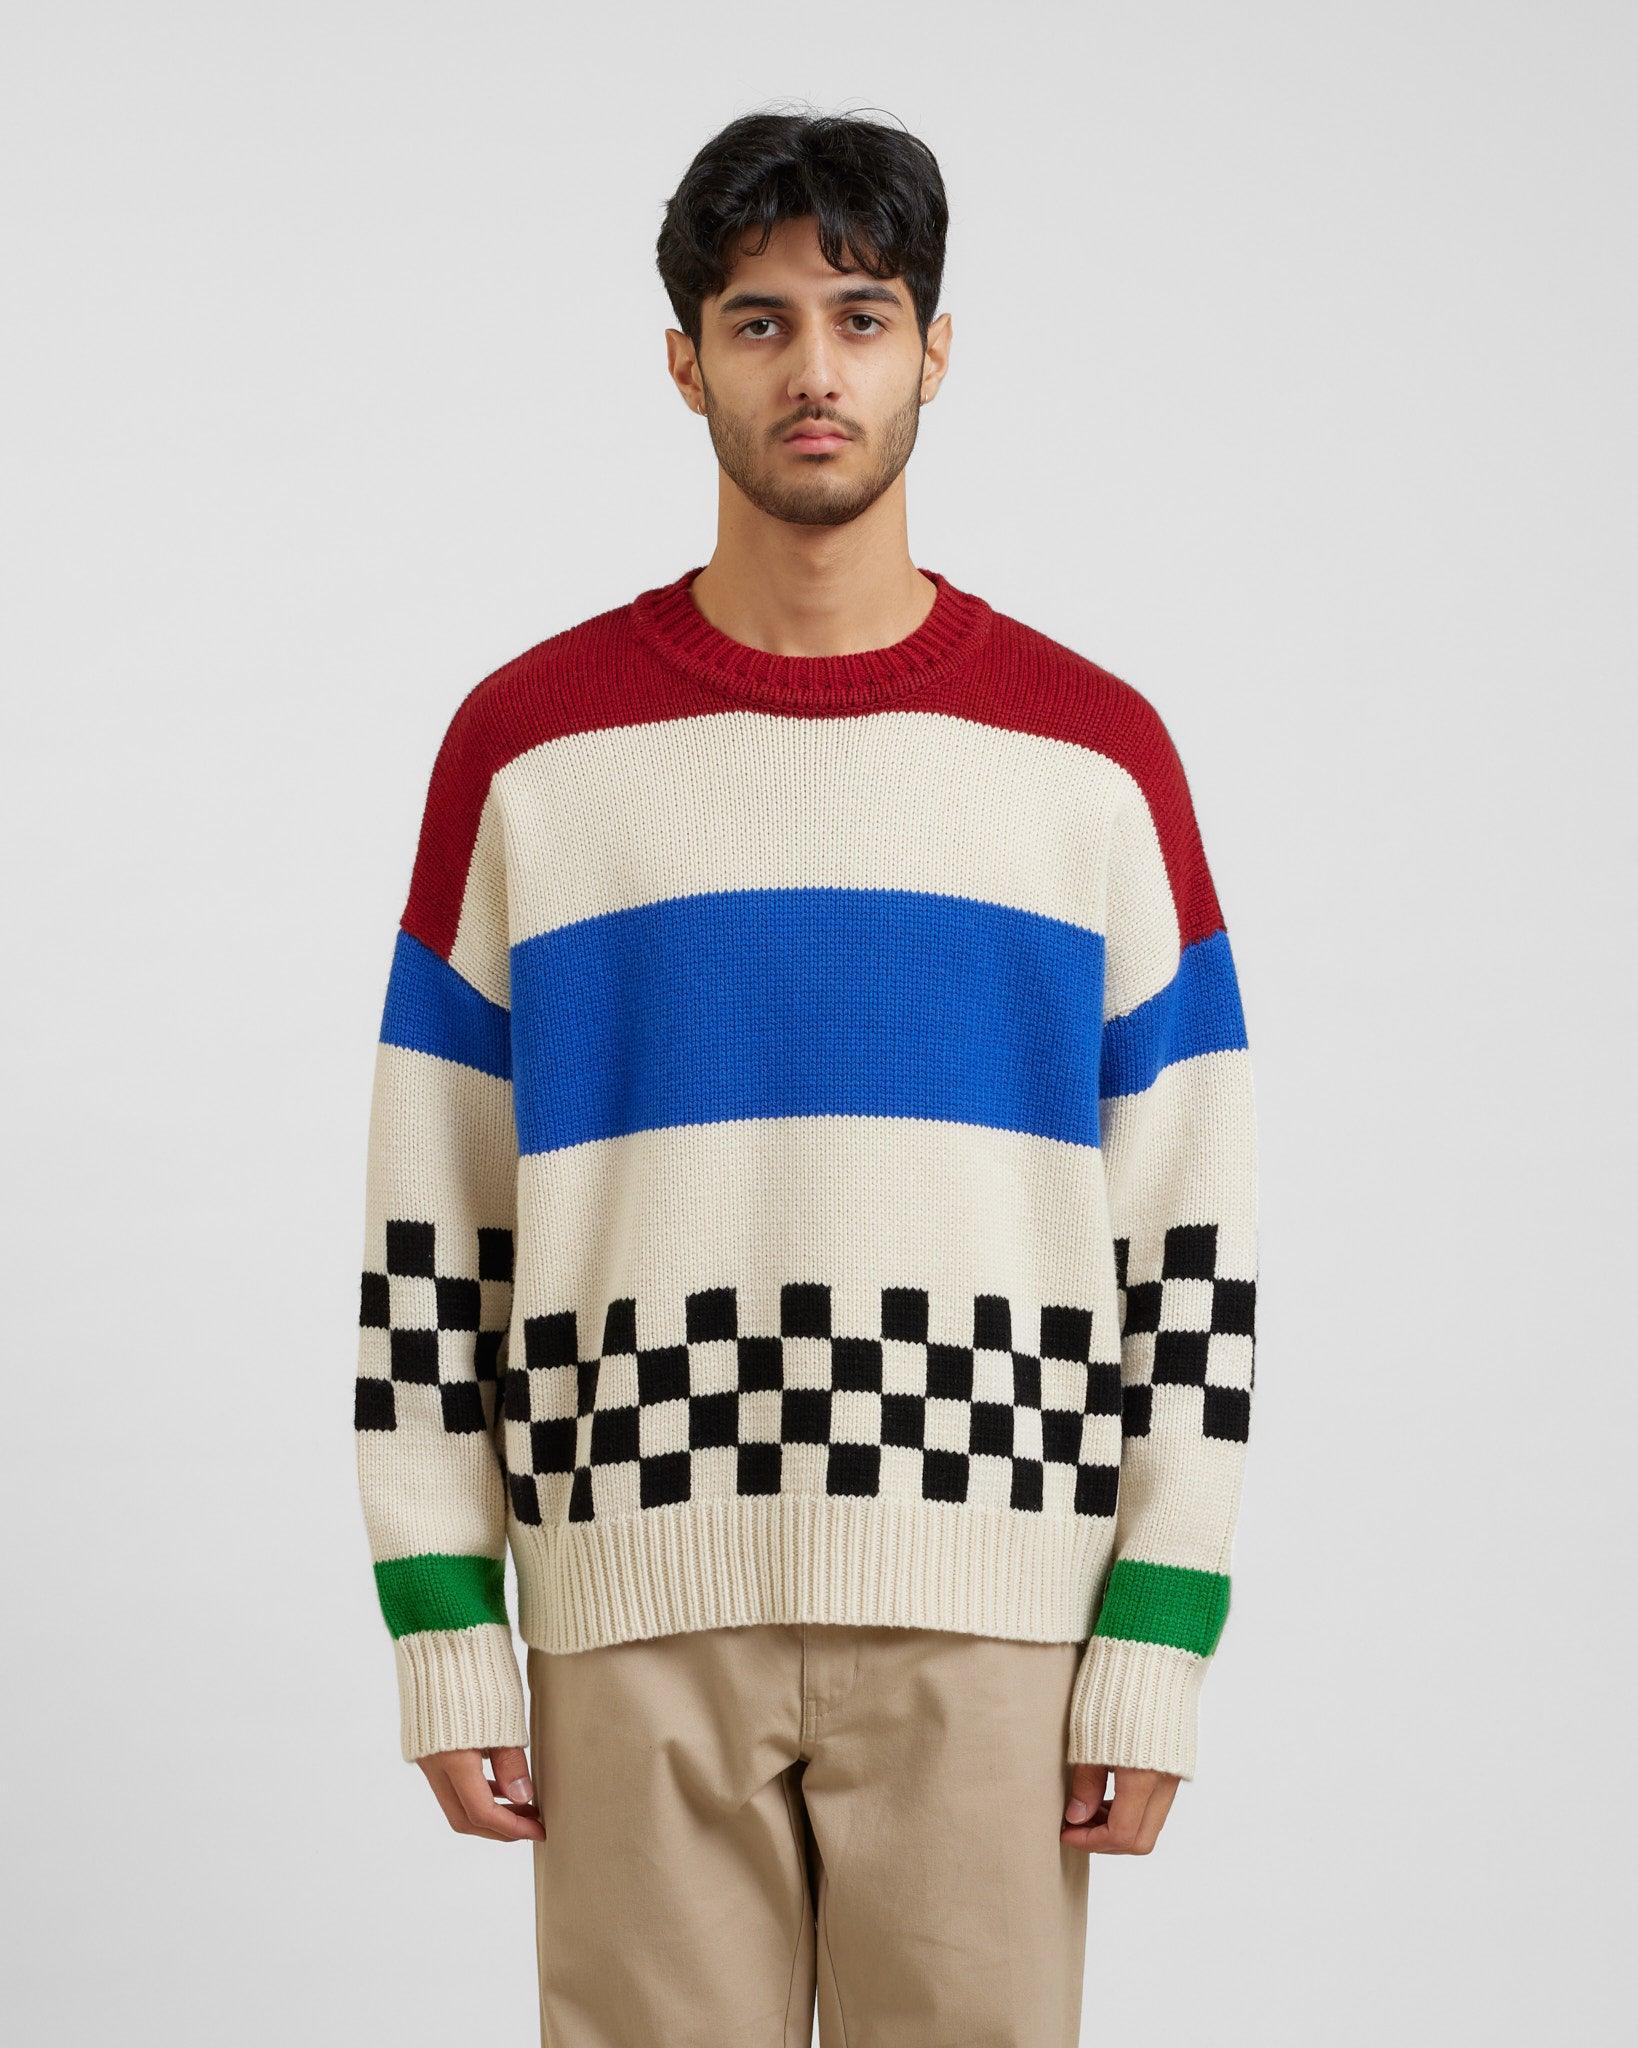 Racing Crewneck Sweater - {{ collection.title }} - Chinatown Country Club 